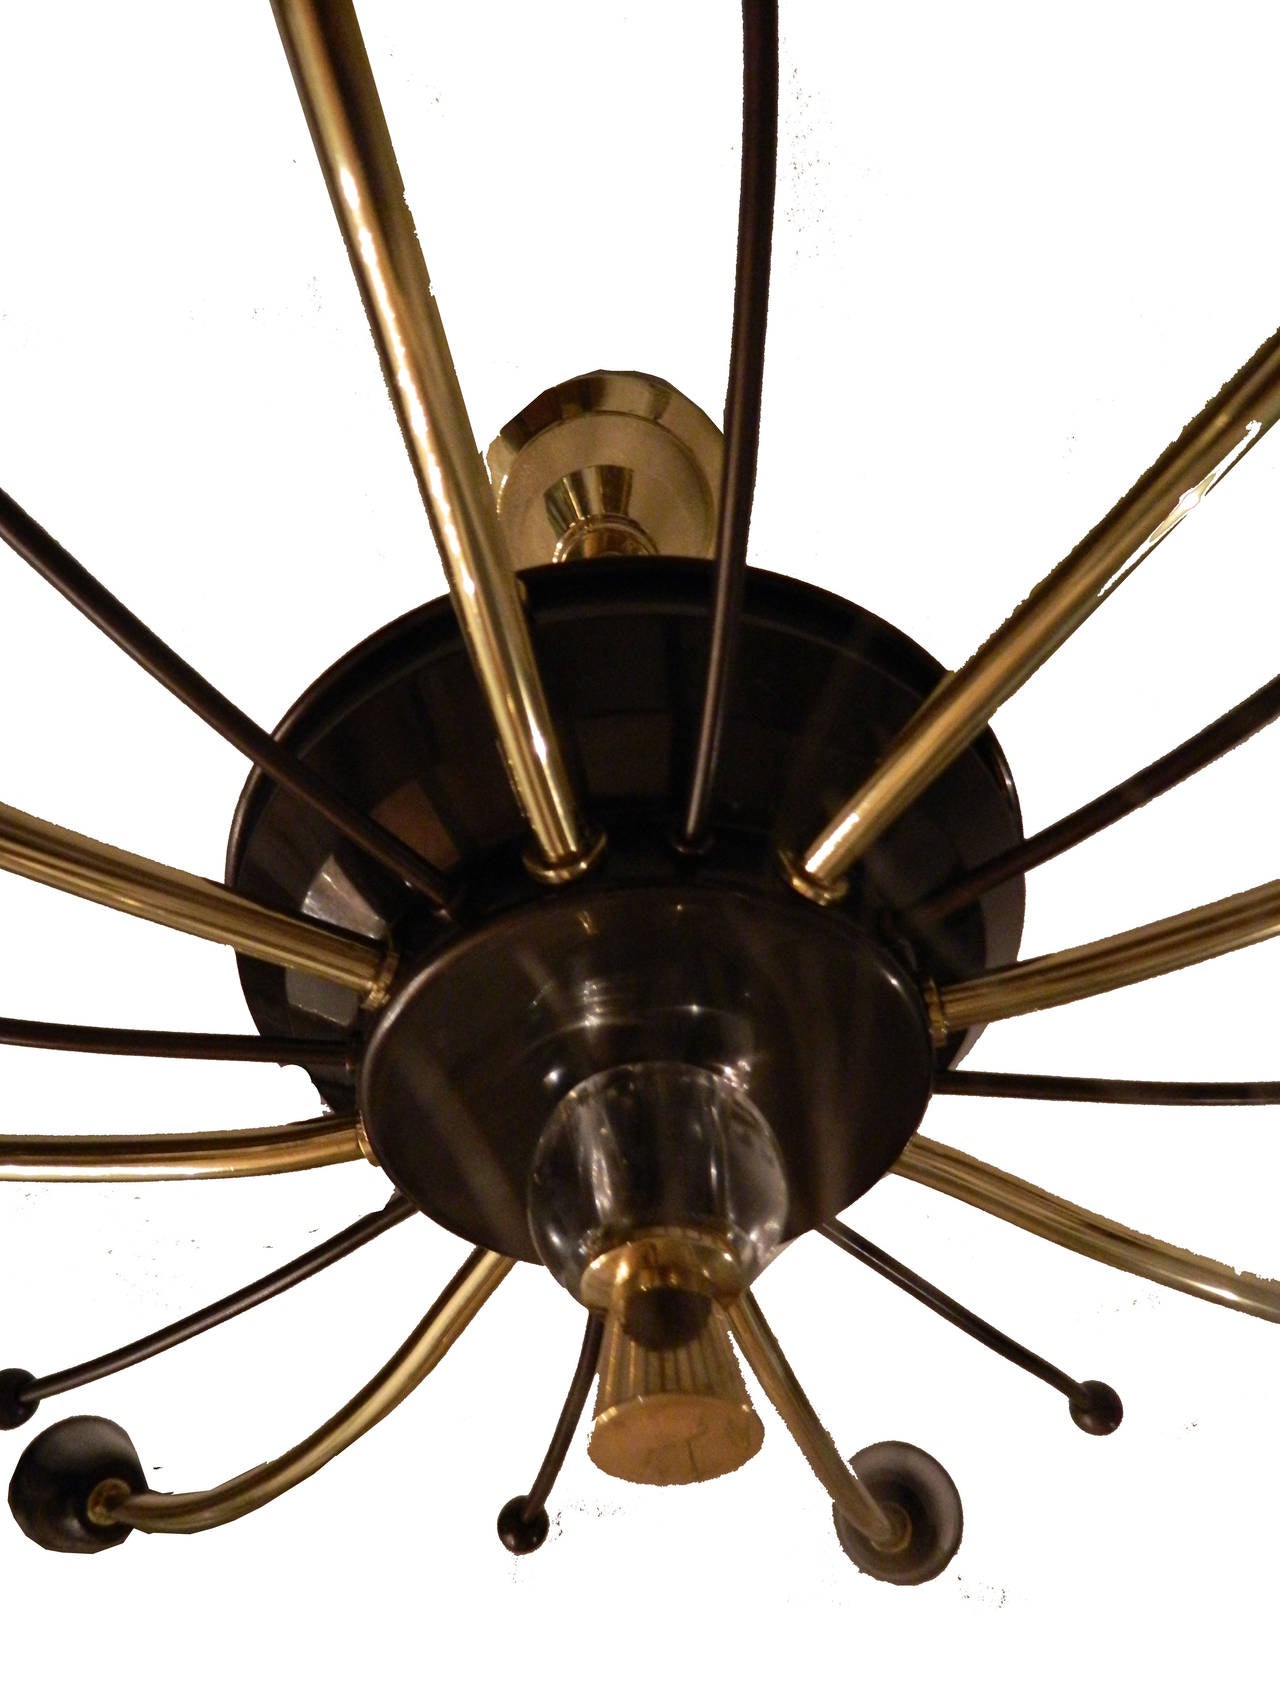 Maison Lunel Flush mount fixture,6 lights  , 2 tone brass and gun metal
Glass ball on the top of the Finial , 60 watts  Max by bulb
US rewired and in working condition